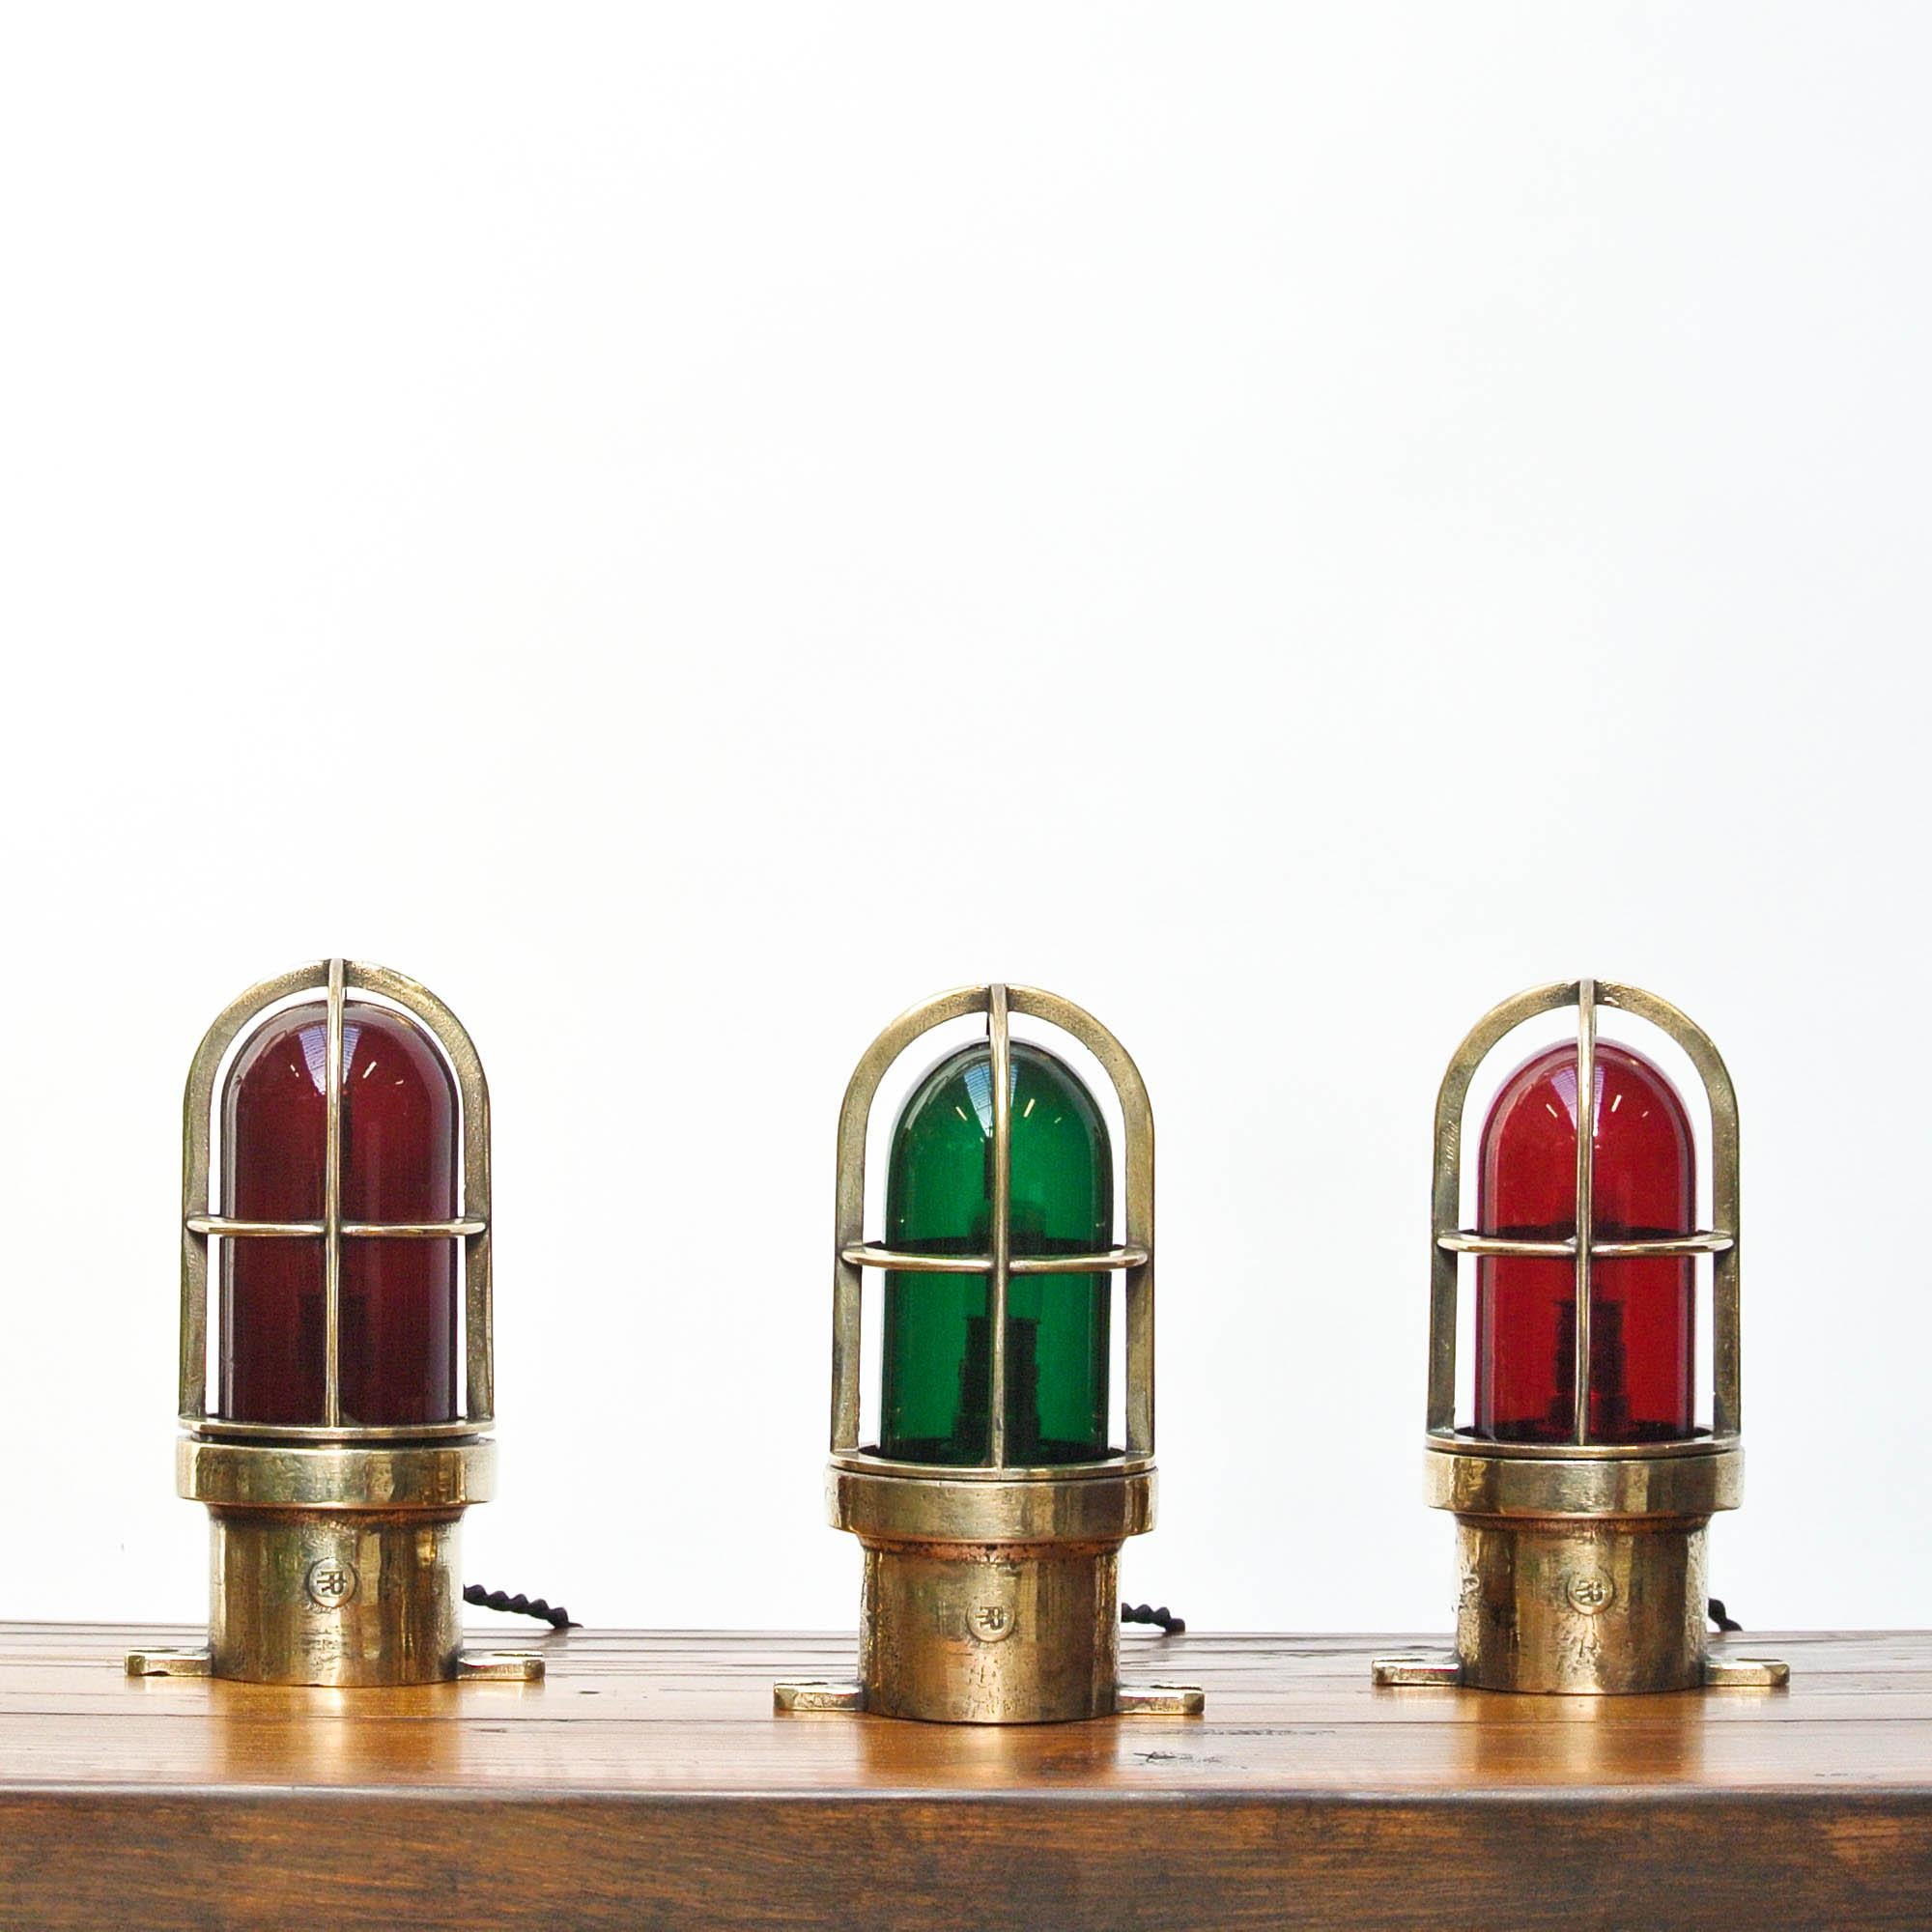 Industrial Set of 3 Small Signal Lamp in Brass and Colored Glass, France, circa 1950-1959